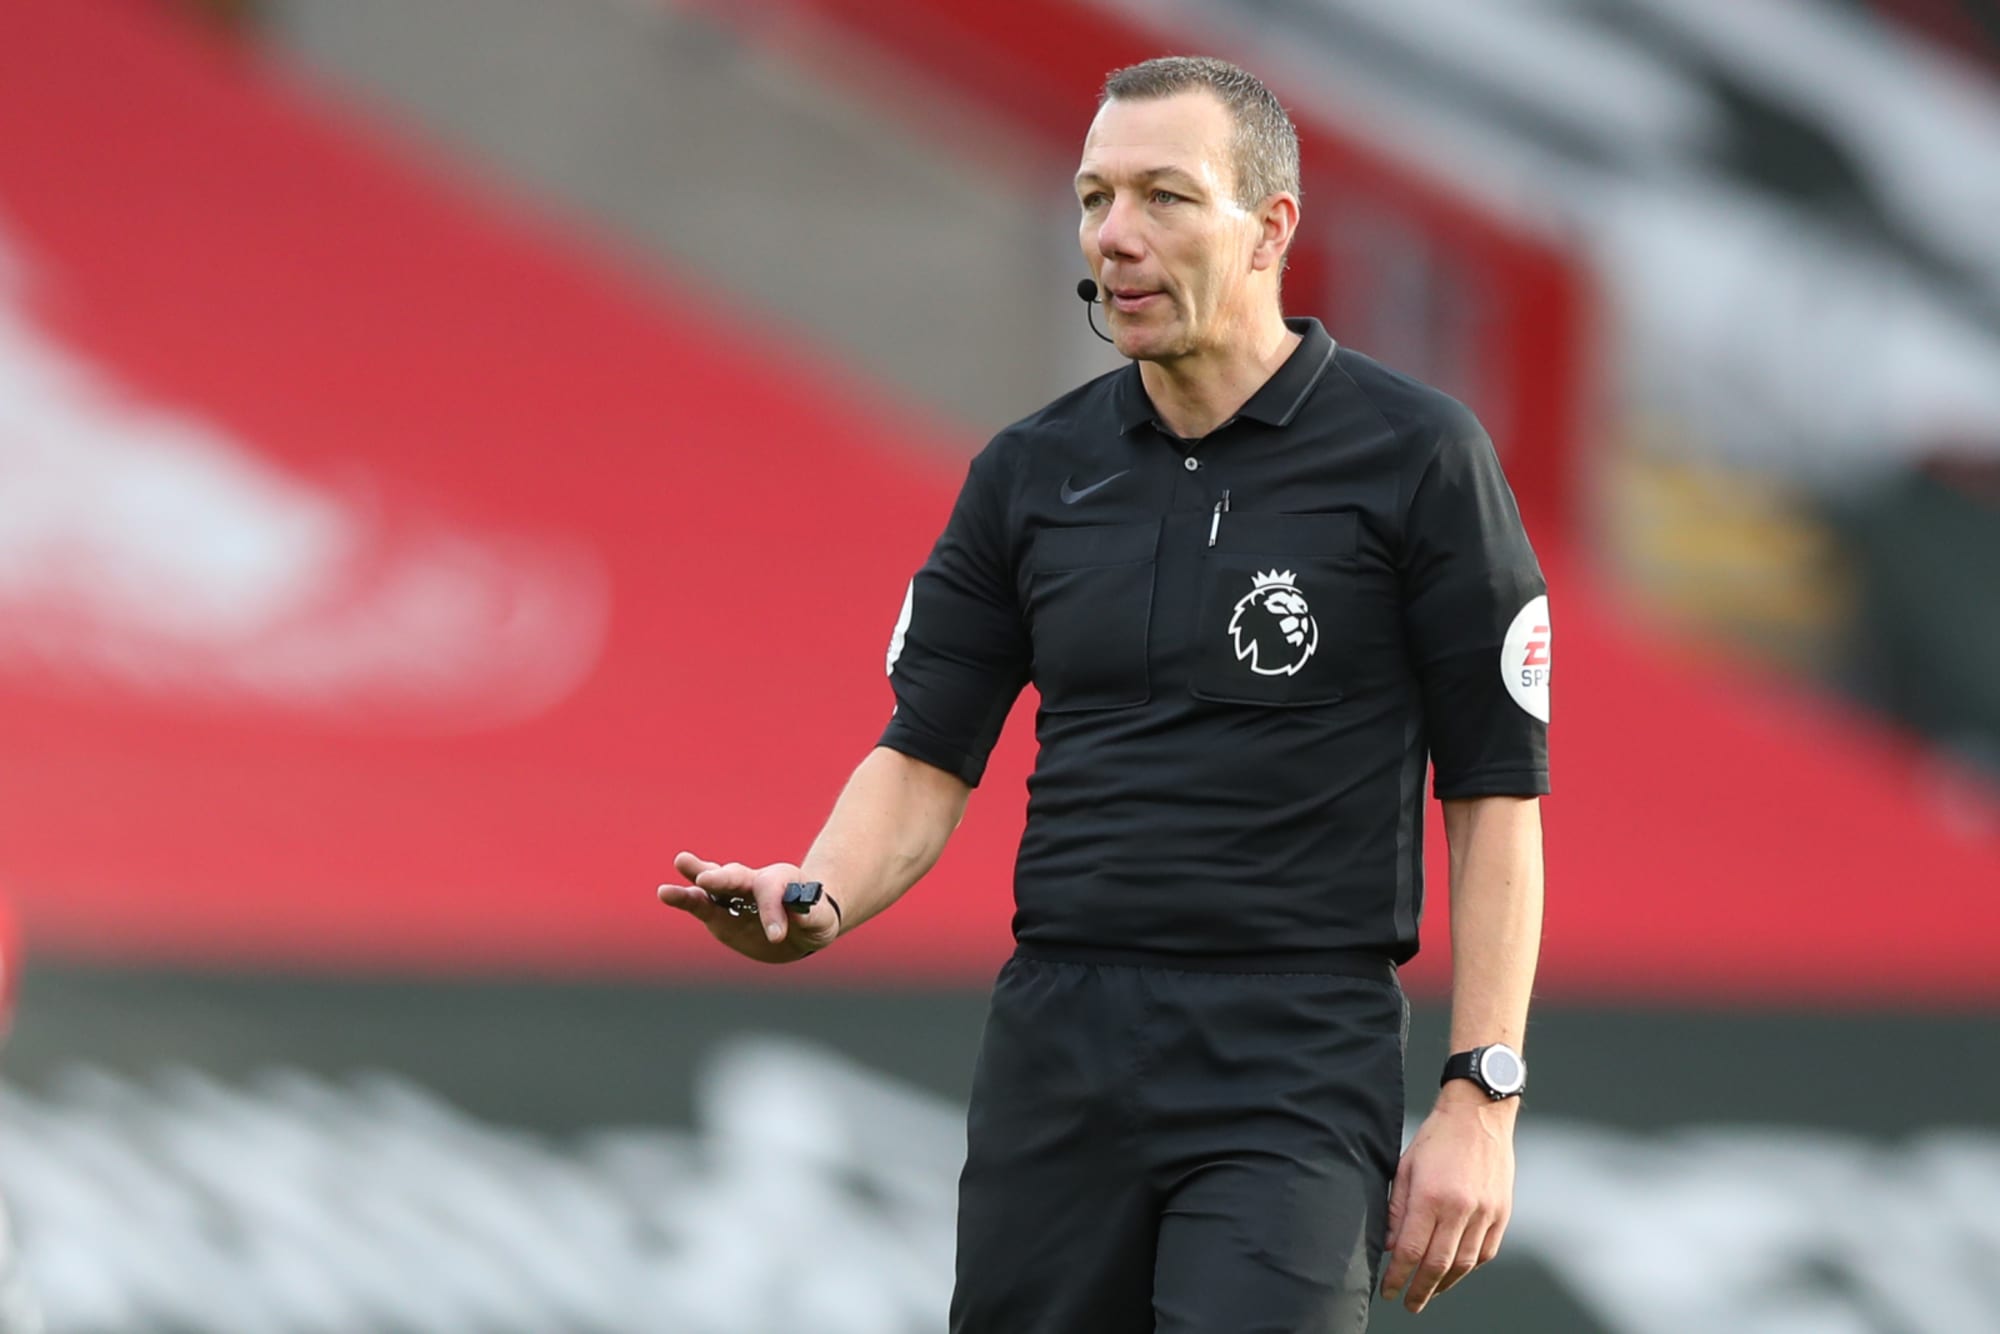 Referee announced for West Hams match against Liverpool